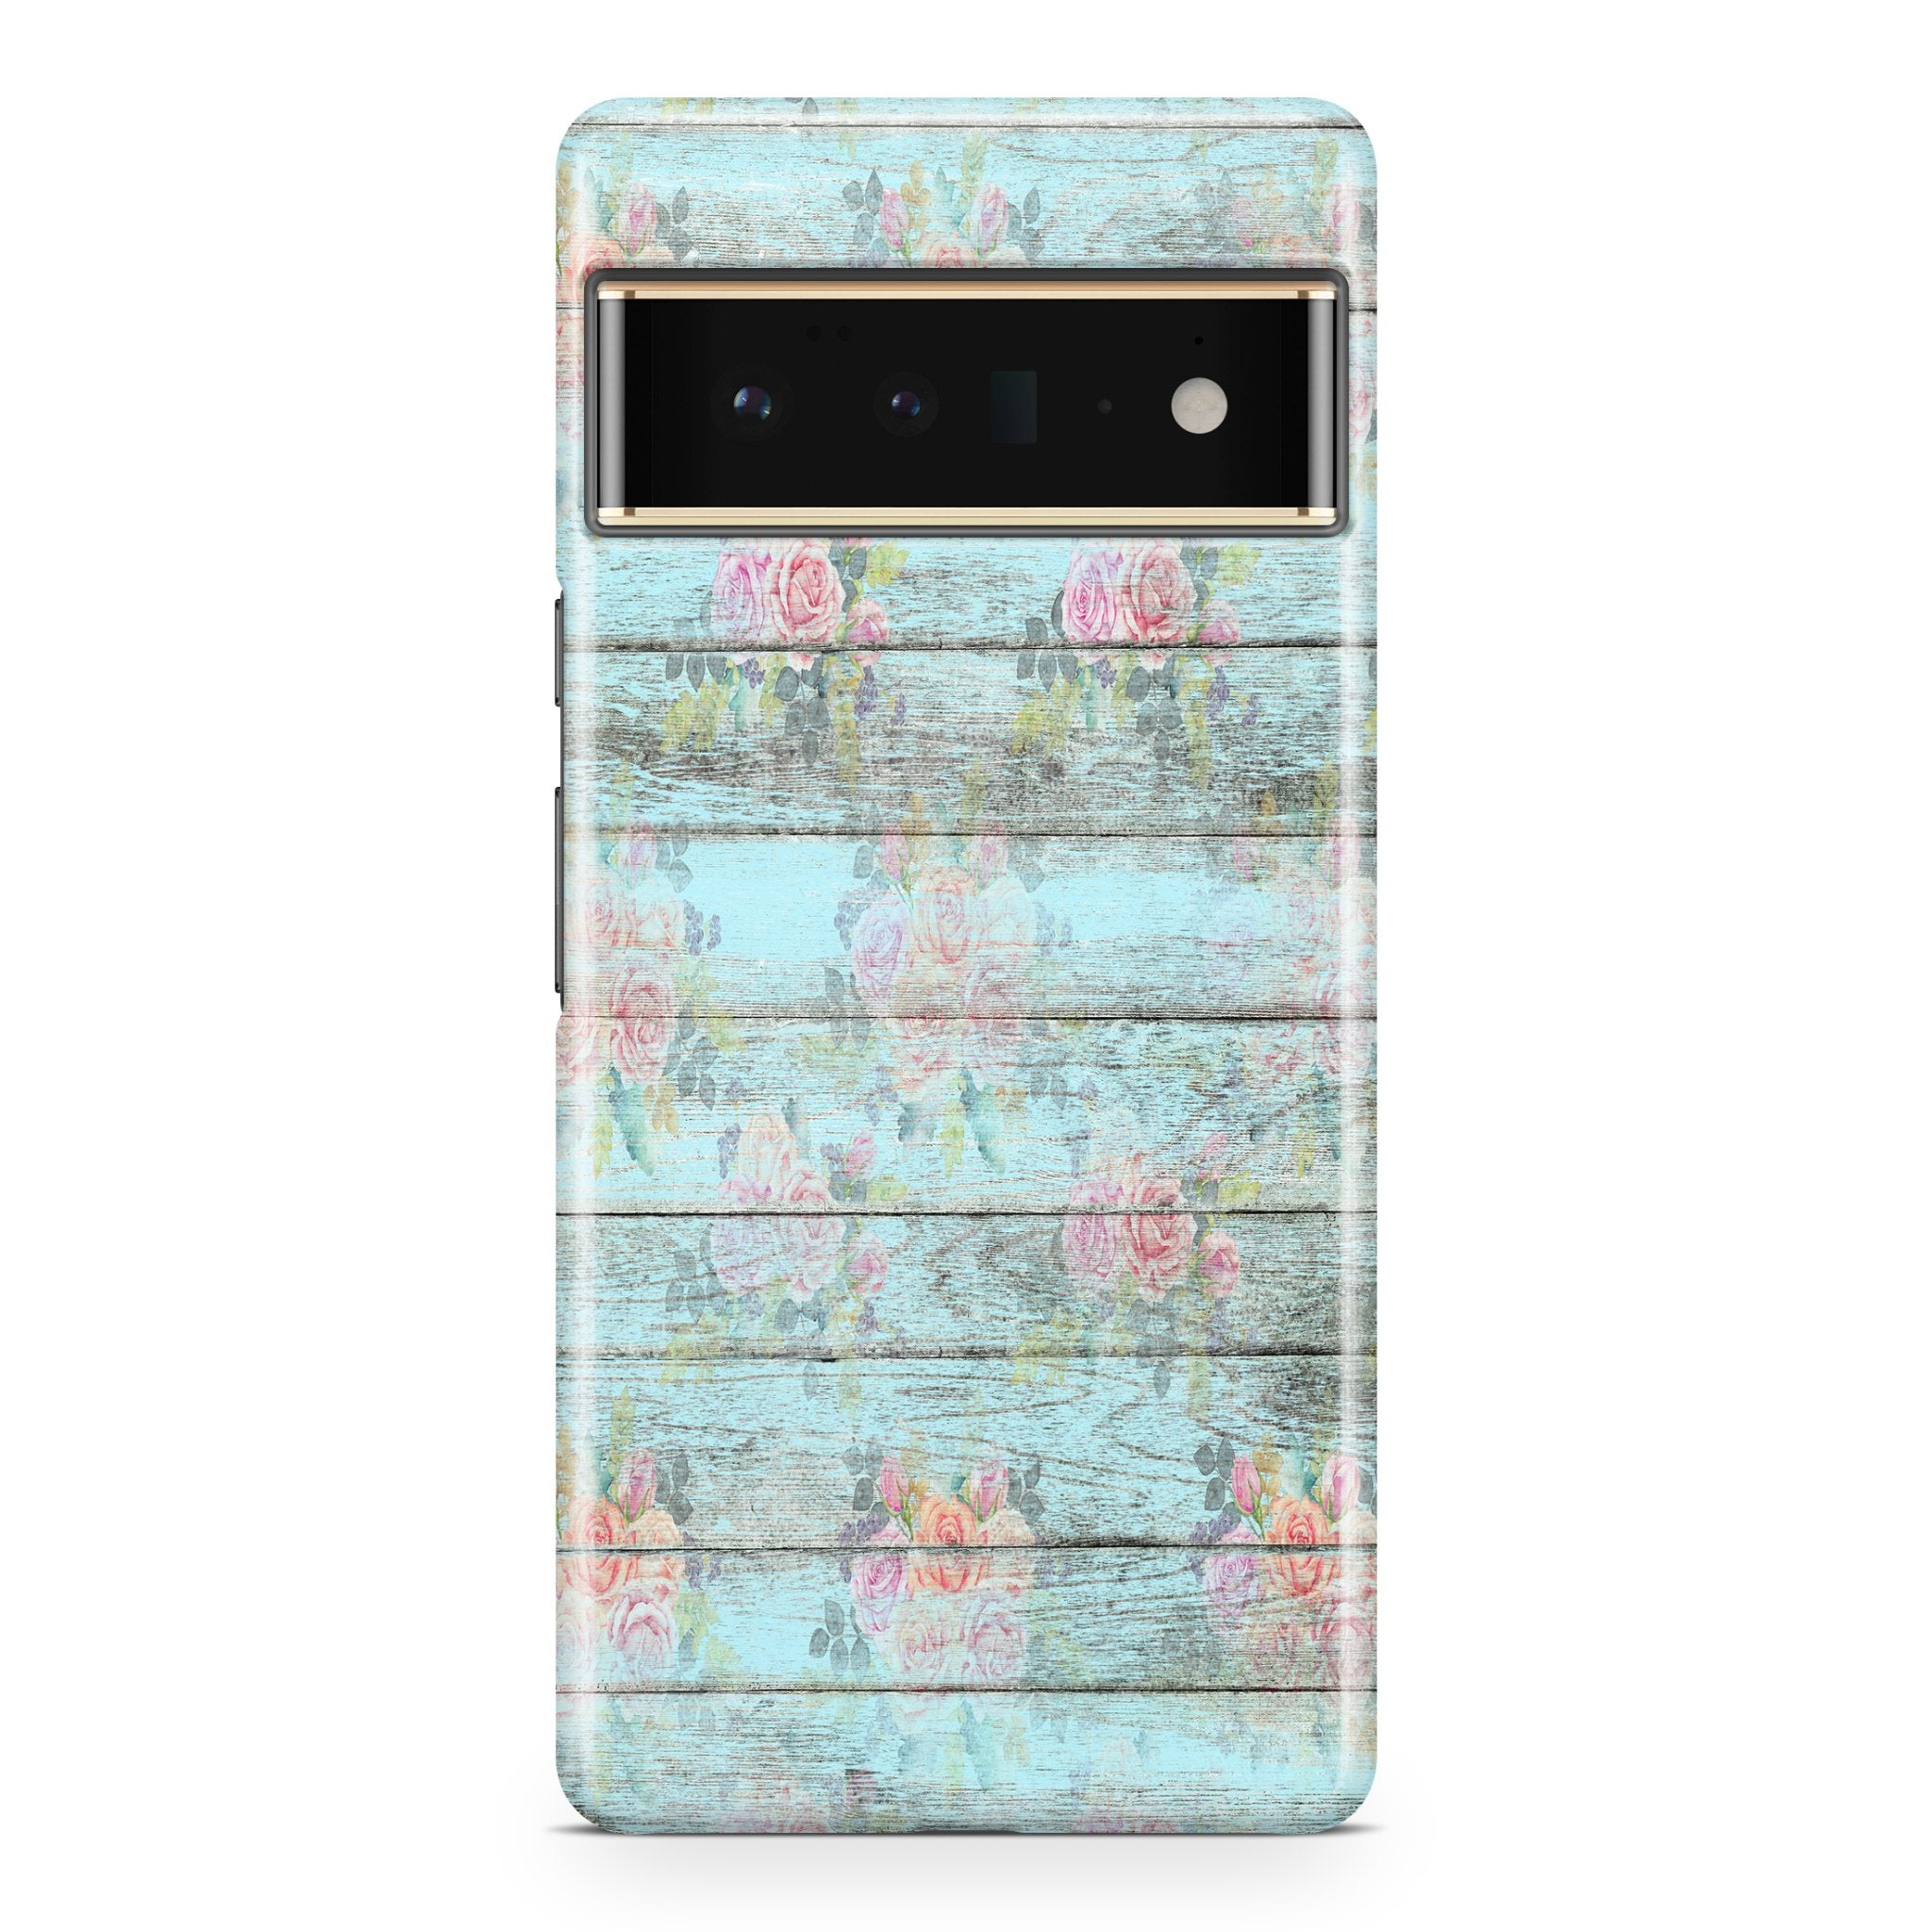 Shabby Chic Wood - Google phone case designs by CaseSwagger